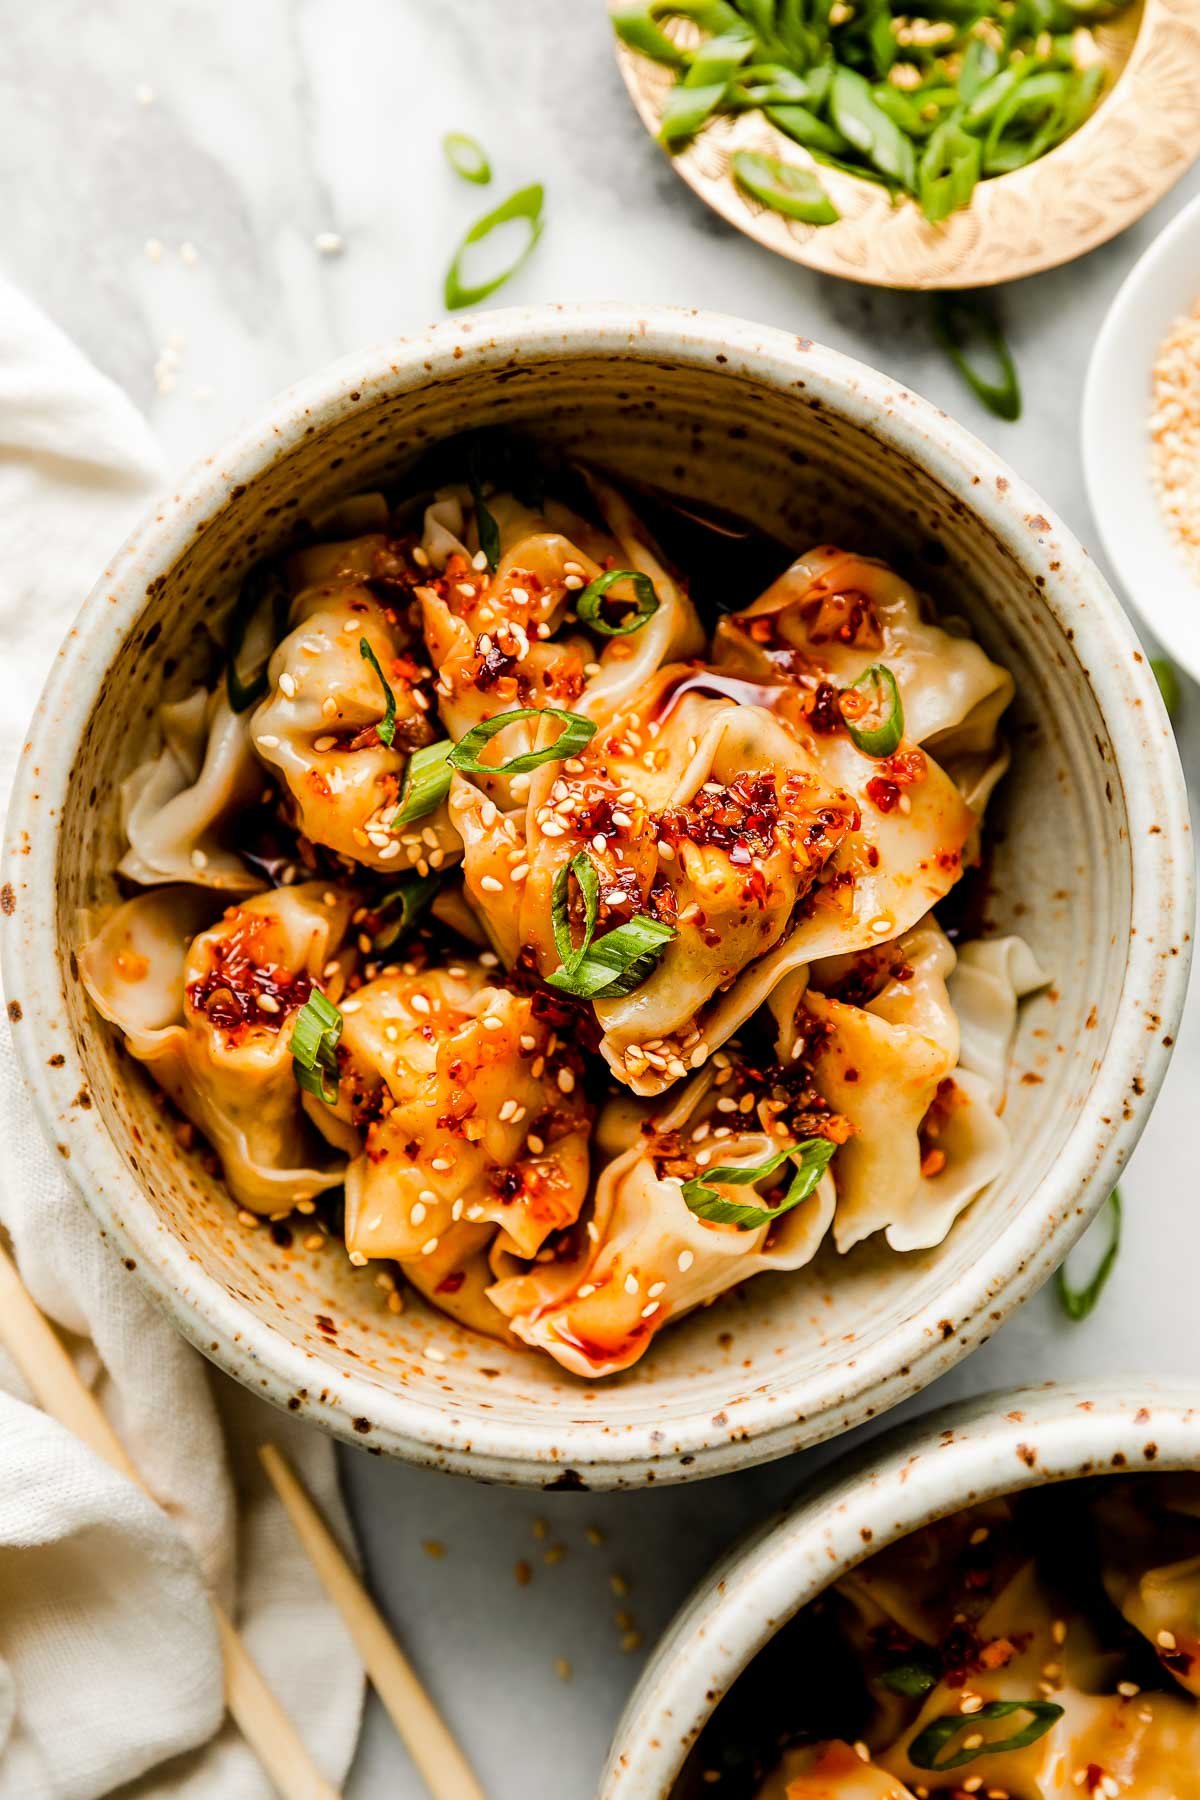 https://playswellwithbutter.com/wp-content/uploads/2023/05/Chicken-Wontons-with-Spicy-Chili-Oil-26.jpg